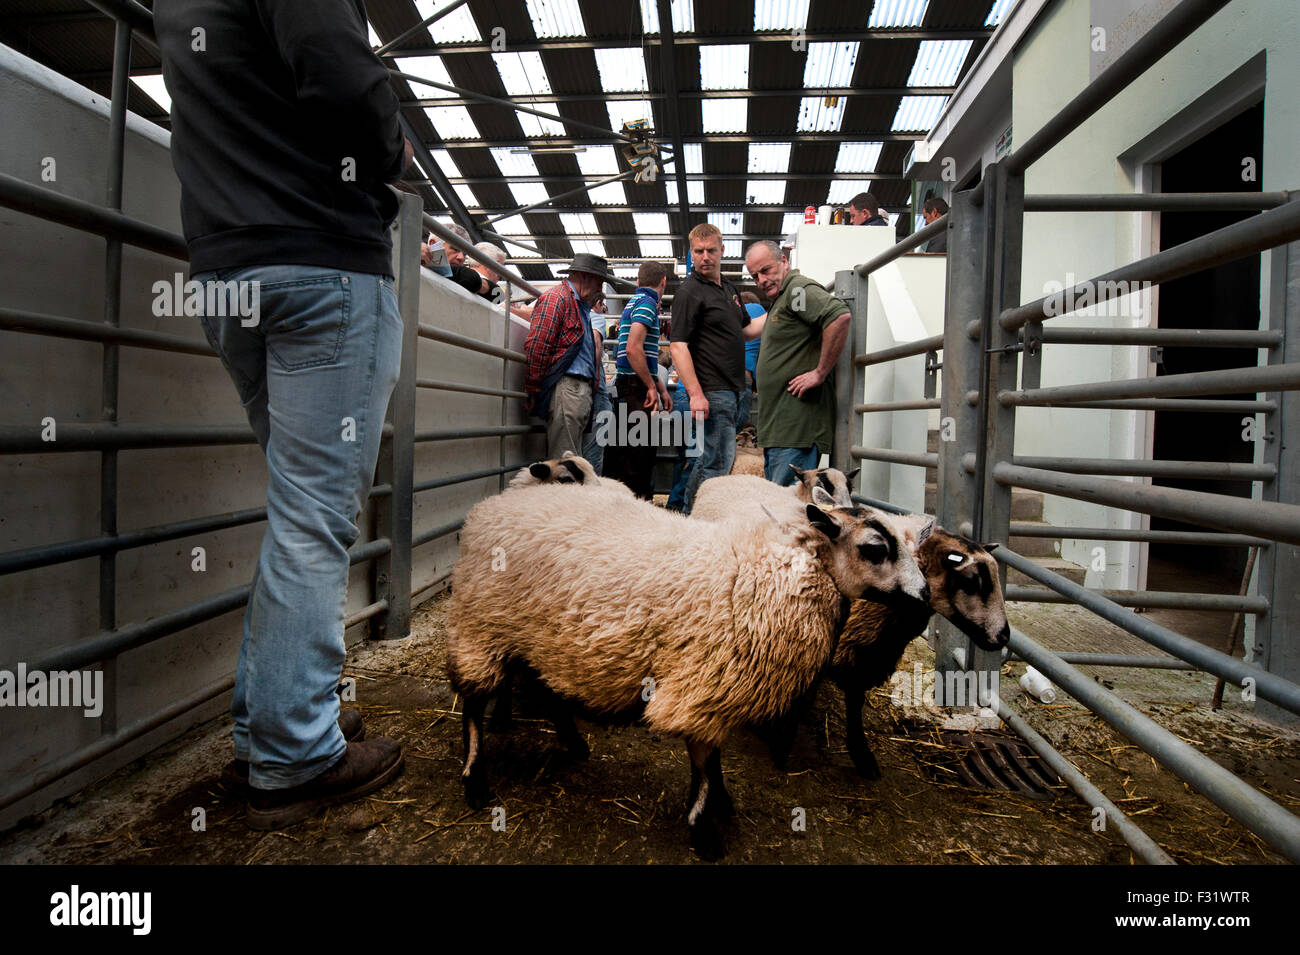 Llandovery, Wales, UK. 27th Sep, 2015. Farmers gathered to buy and sell prize sheep at the Llandovery sheep auctions, only held once a year. The sheep festival also took place, giving an insight in to Welsh farming for all ages. Credit:  roger tiley/Alamy Live News Stock Photo